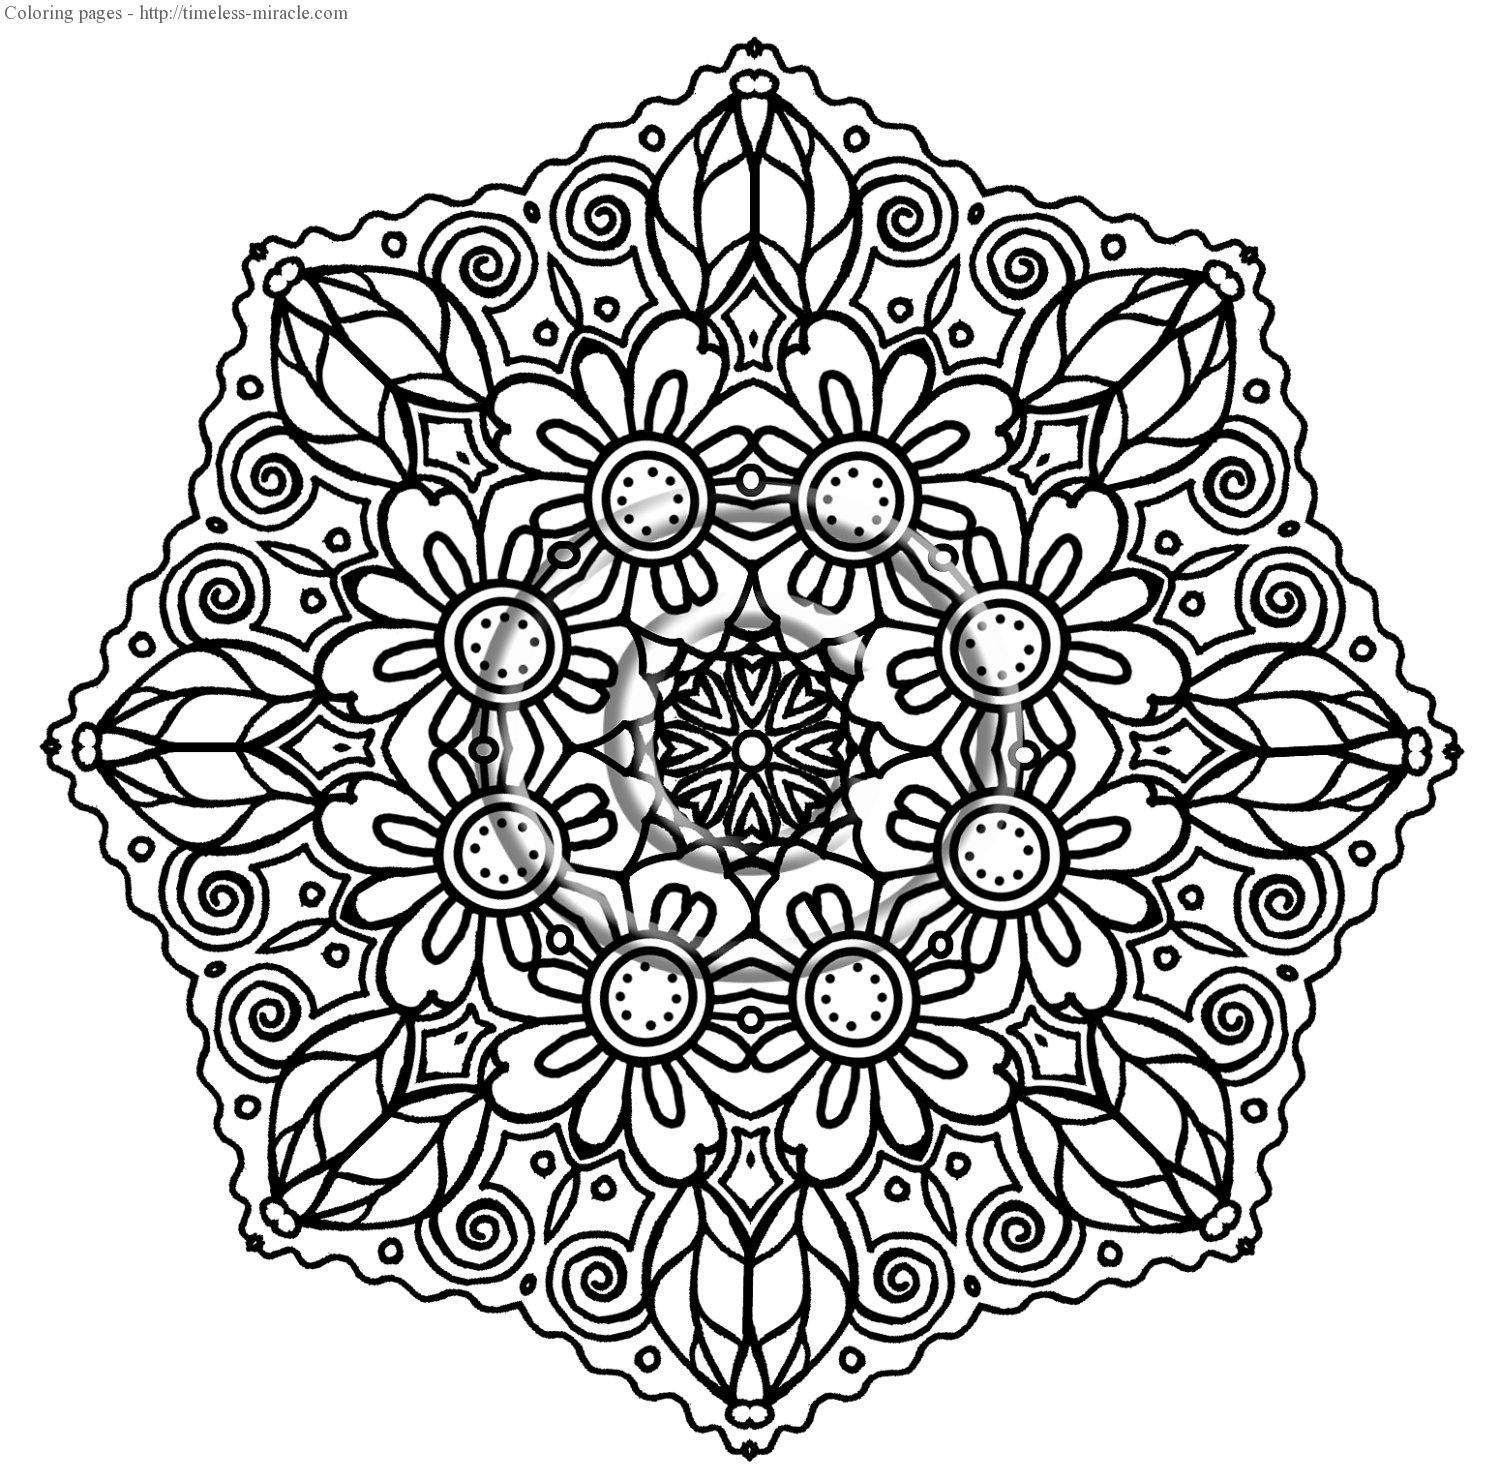 Intricate Coloring Pages Printable Boys
 Intricate coloring pages timeless miracle